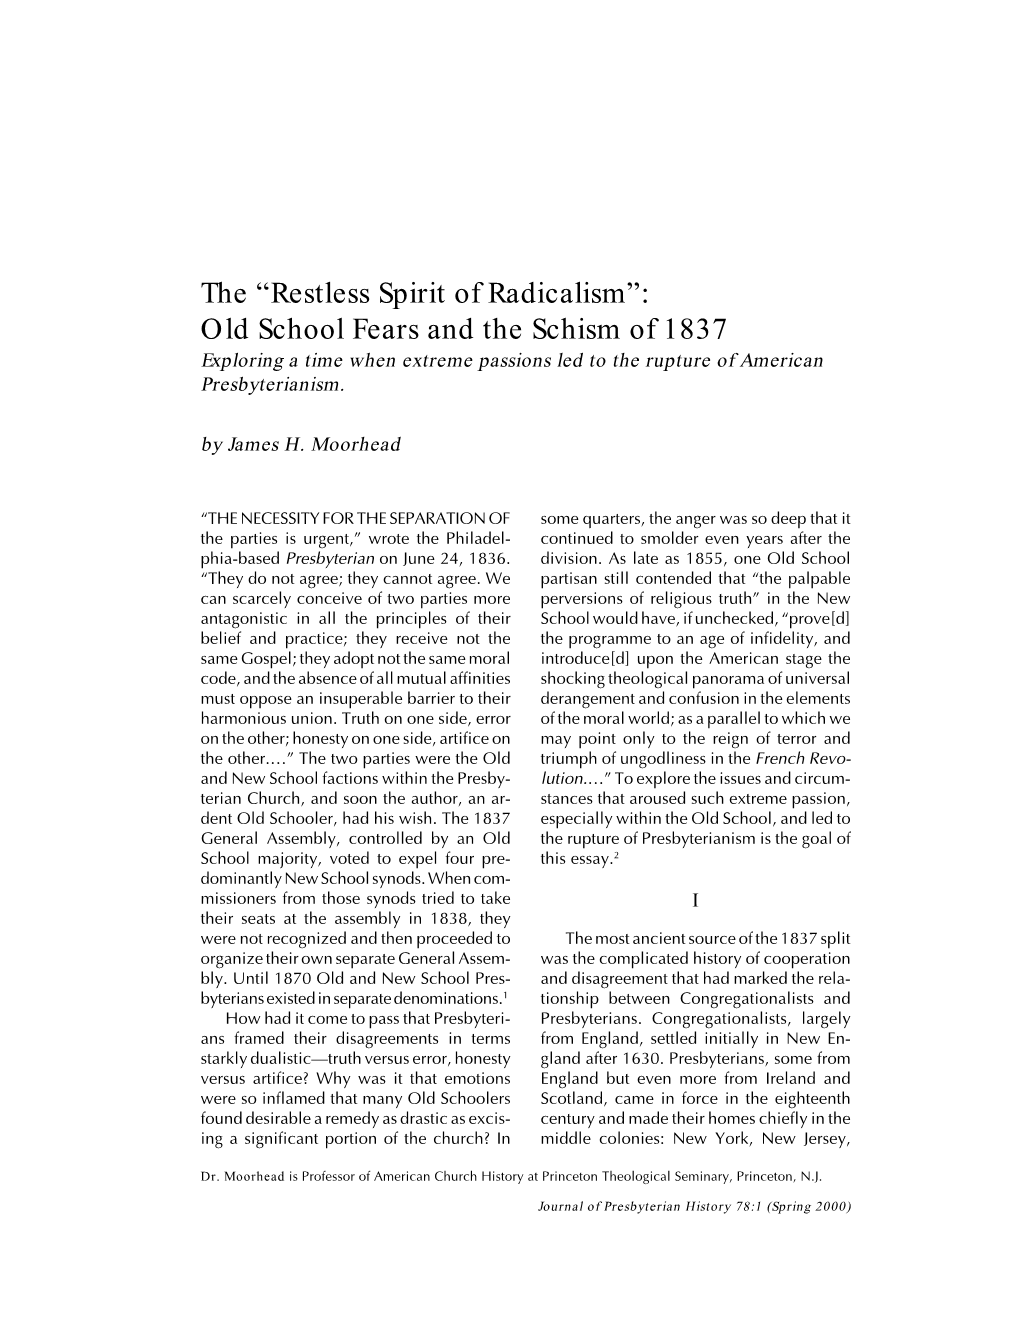 Restless Spirit of Radicalism”: Old School Fears and the Schism of 1837 Exploring a Time When Extreme Passions Led to the Rupture of American Presbyterianism